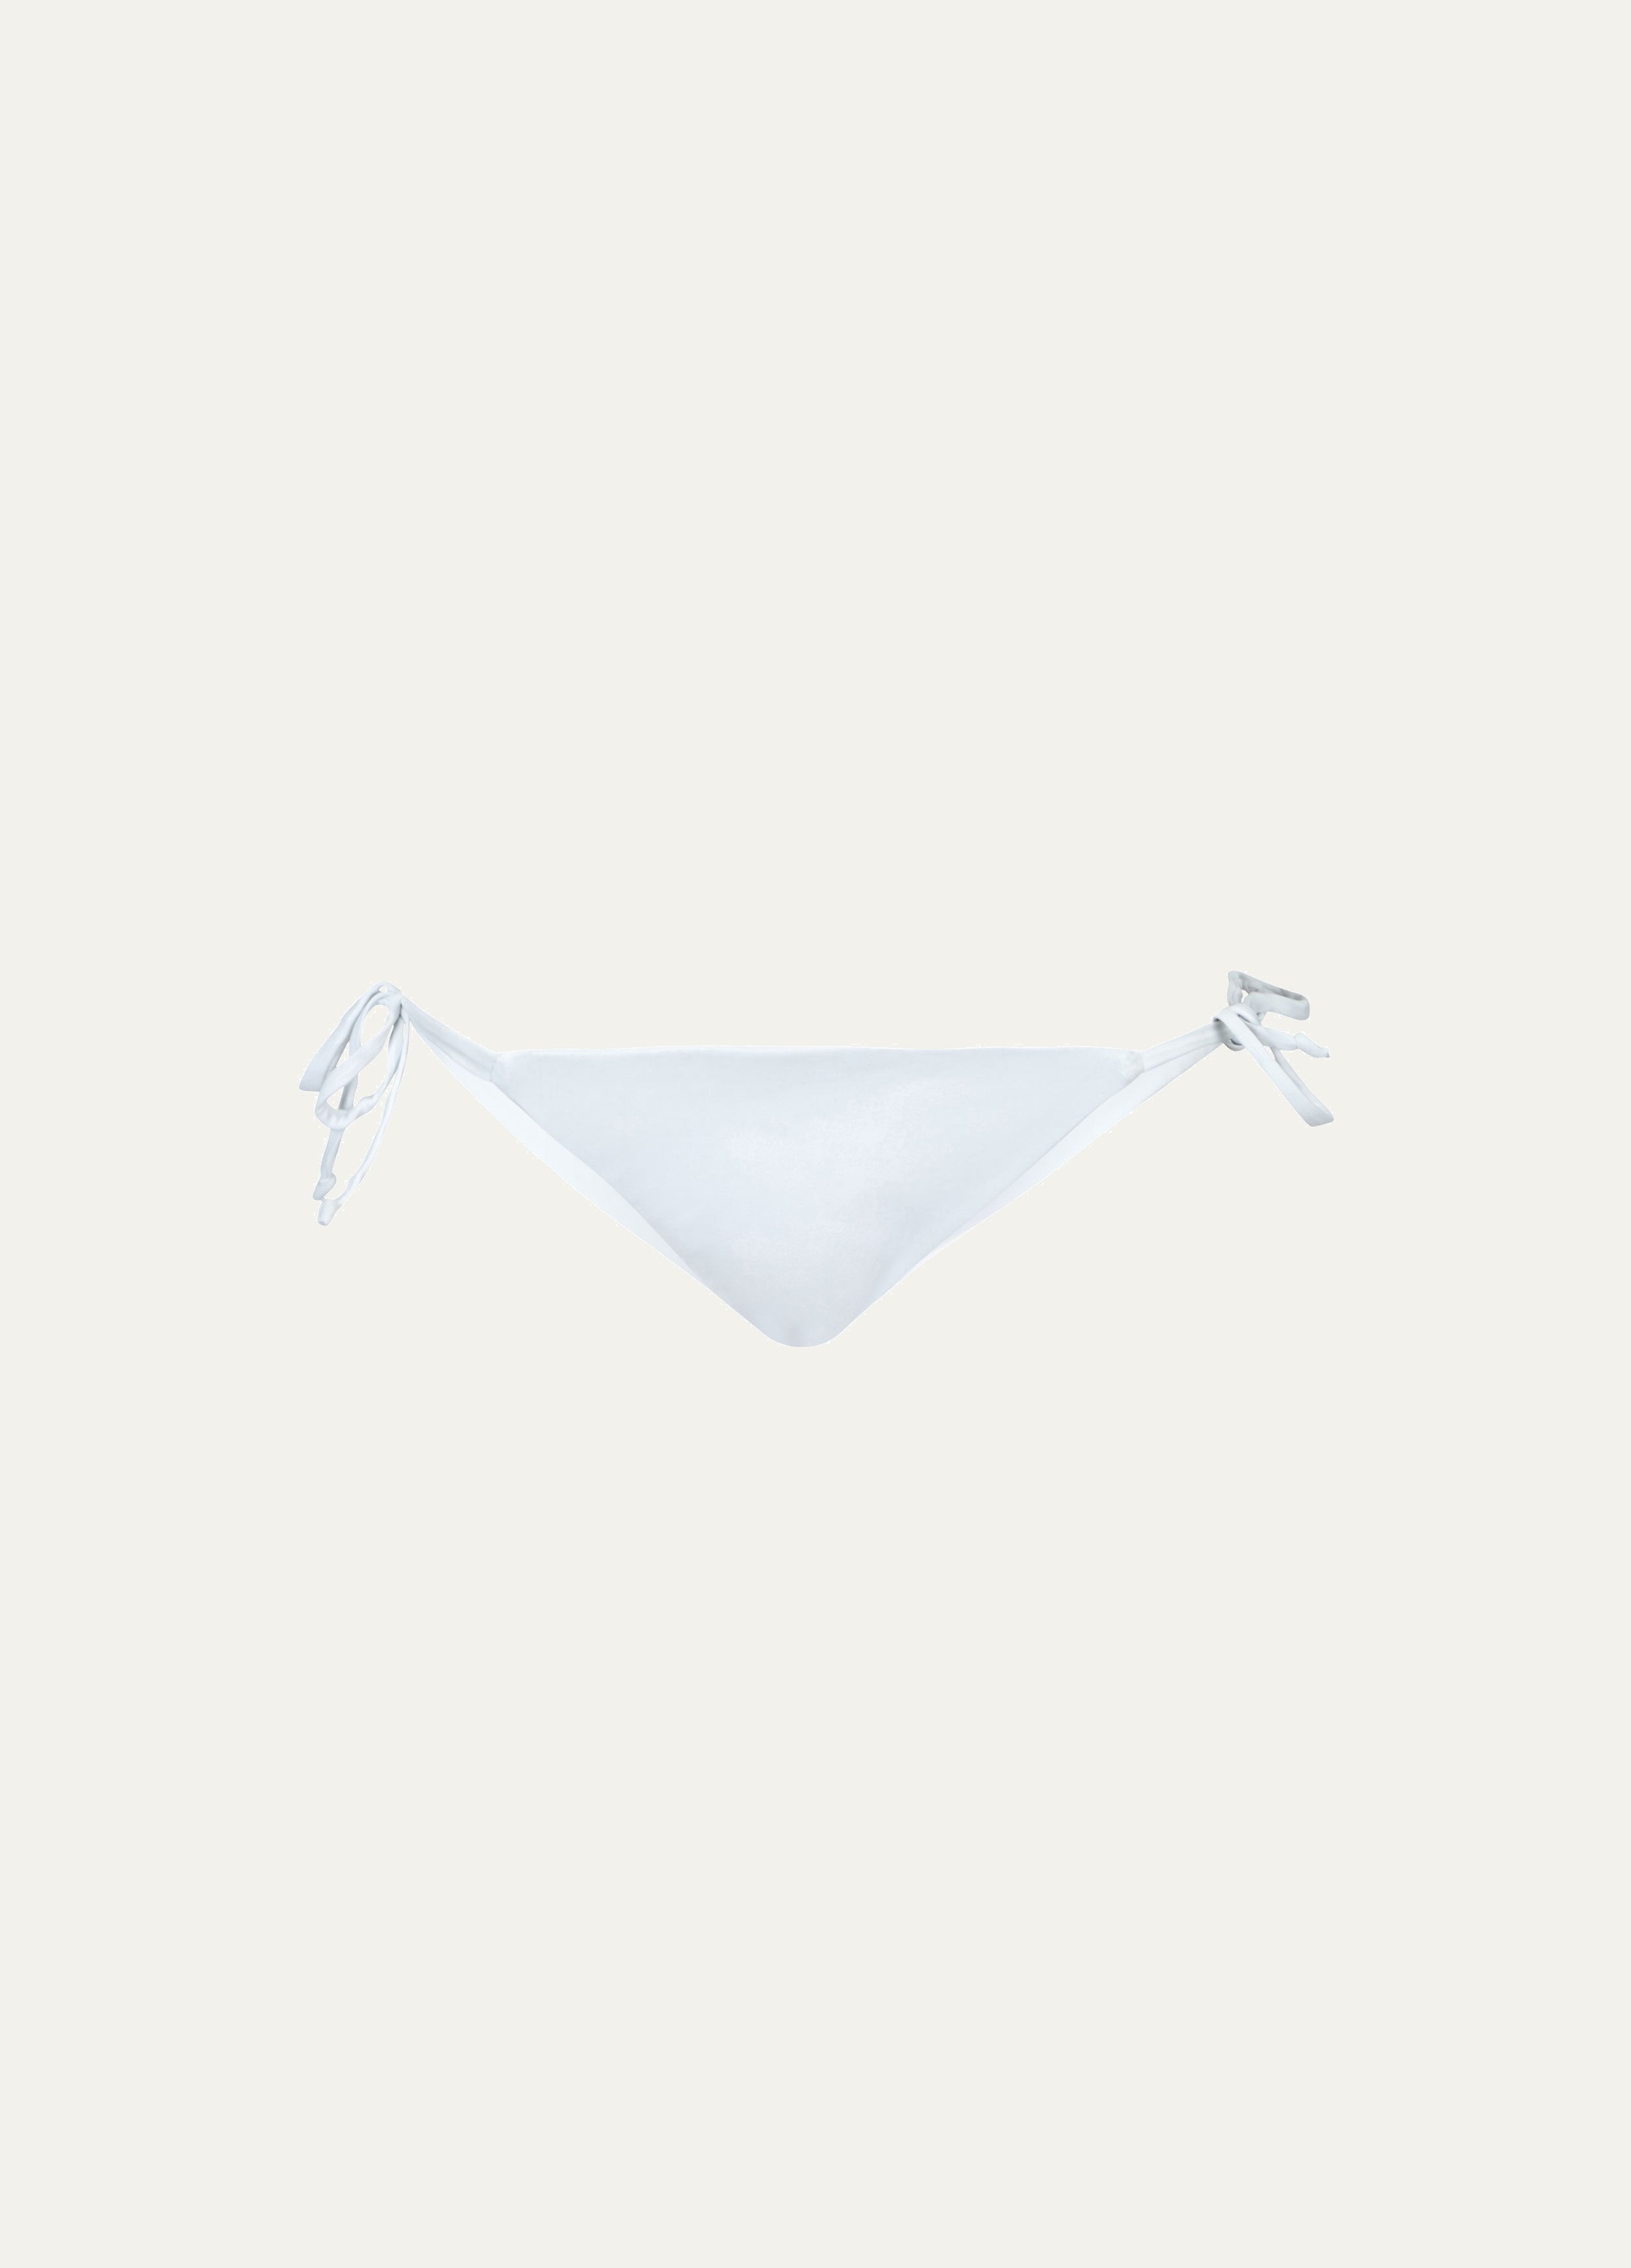 The Tie-Me-Up Brief - Matte Fabric